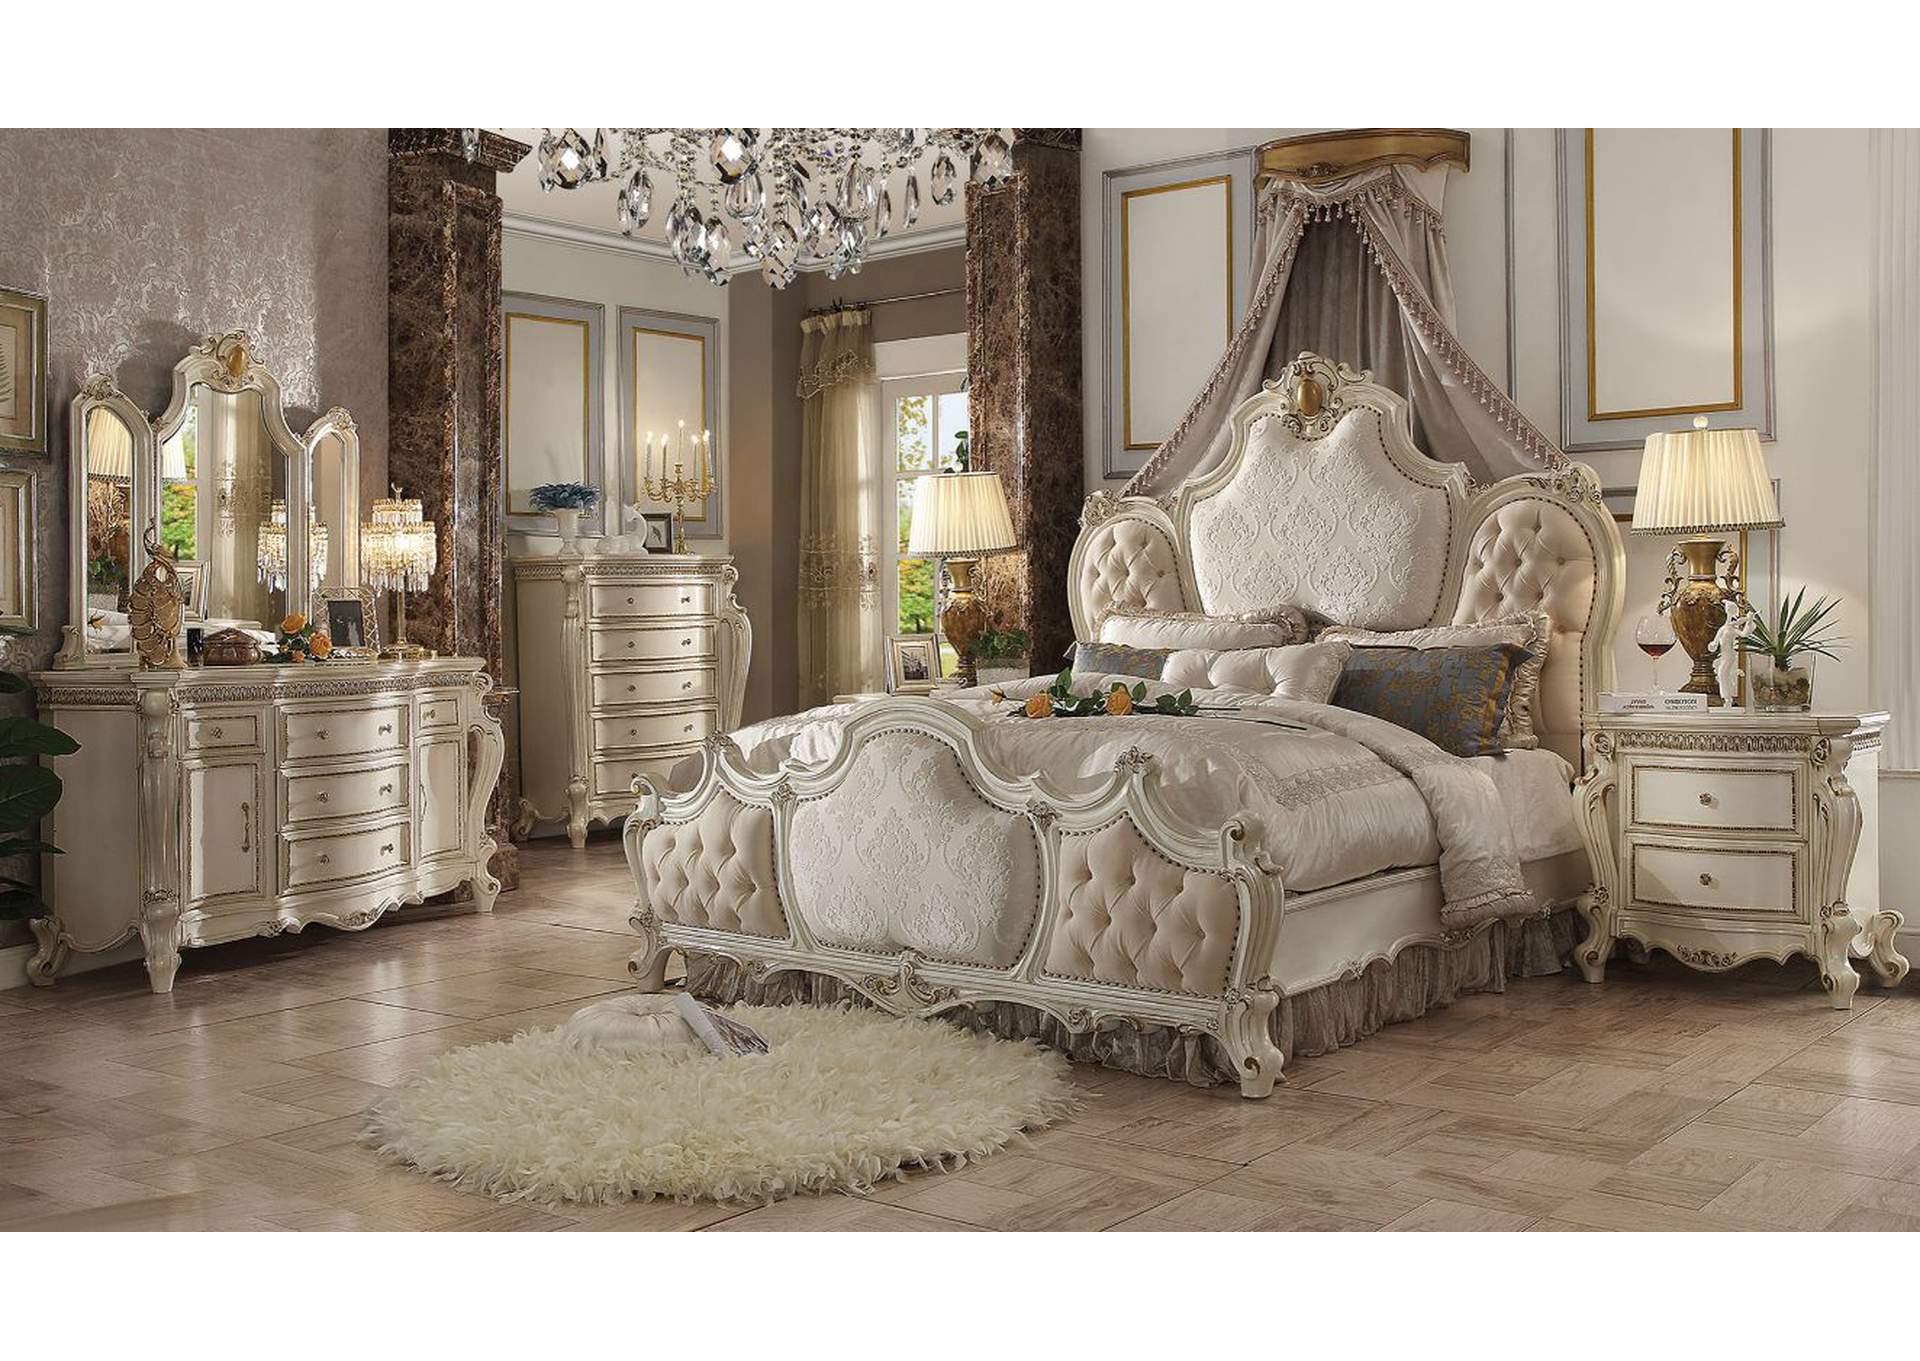 Picardy Fabric & Antique Pearl Queen Bed,Acme